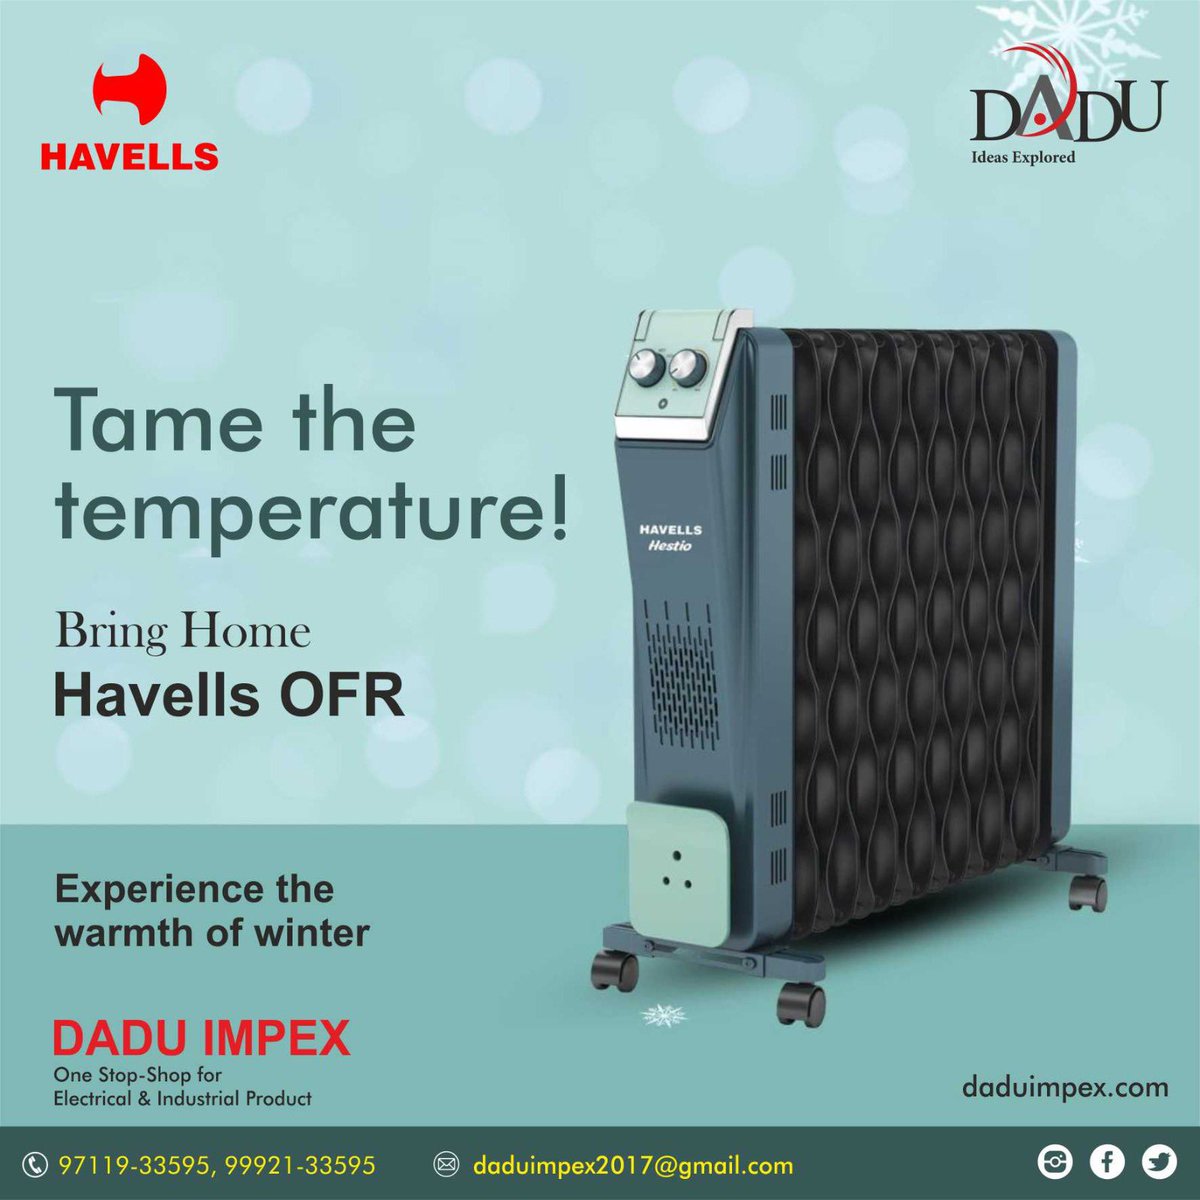 Warm up your space with Havells’s Room Heaters-combining comfort and safety in every cozy corner!

#Havells #RoomHeaters #Winter2023 #StayWarm #SafeHeating #DaduImpex #India #NothIndia #OilHeater #Heater